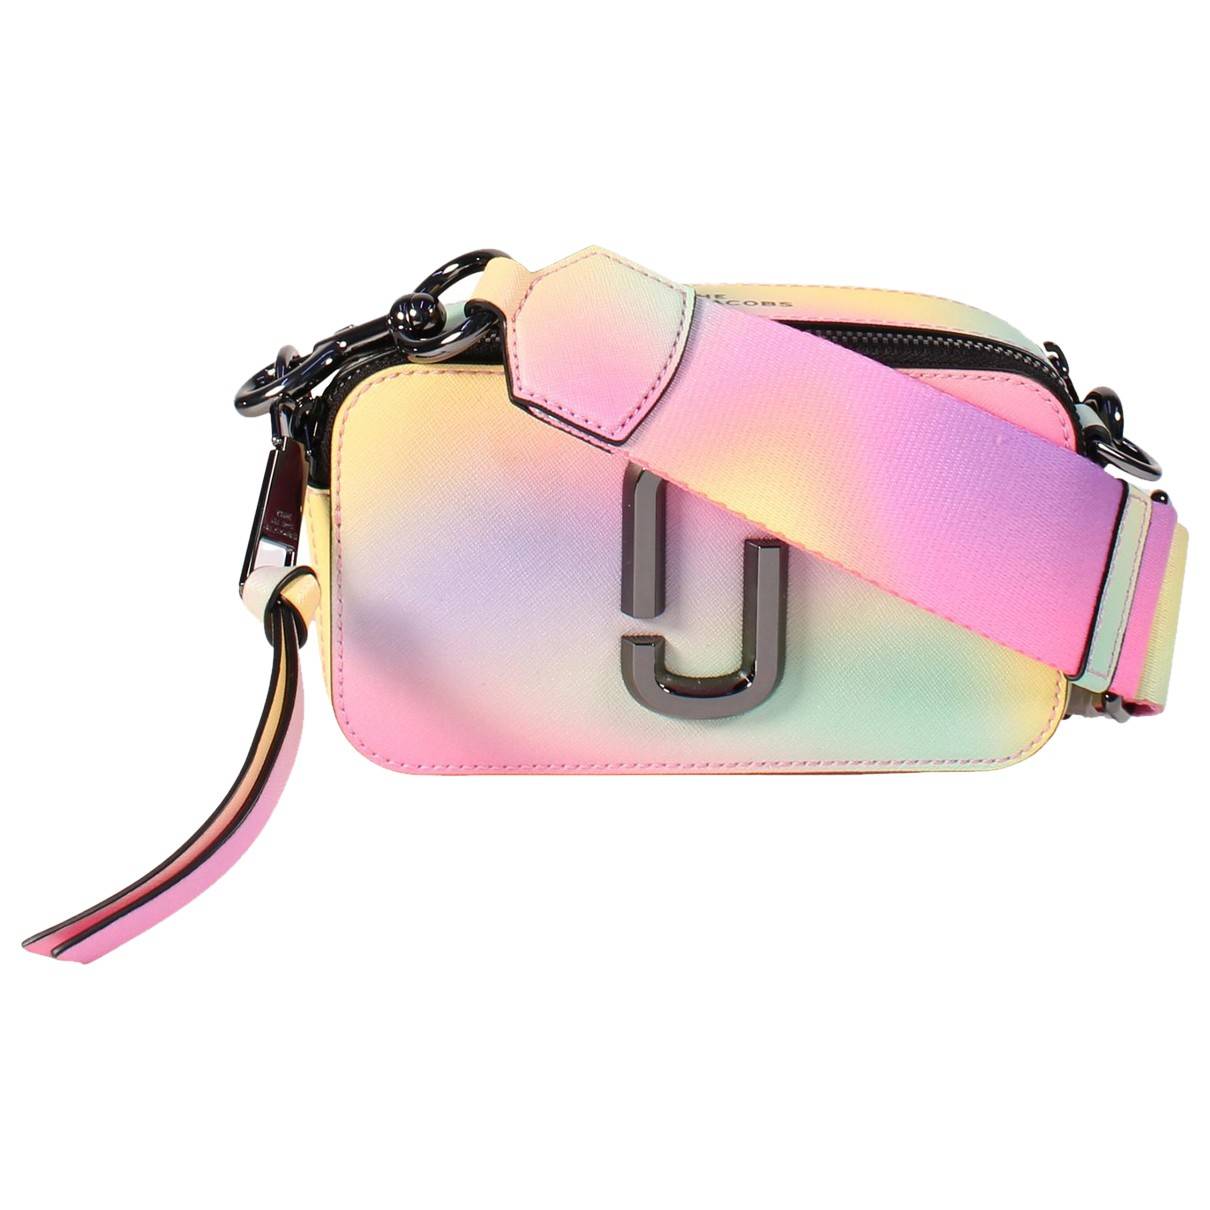 The Snapshot multicolor Marc Jacobs bag